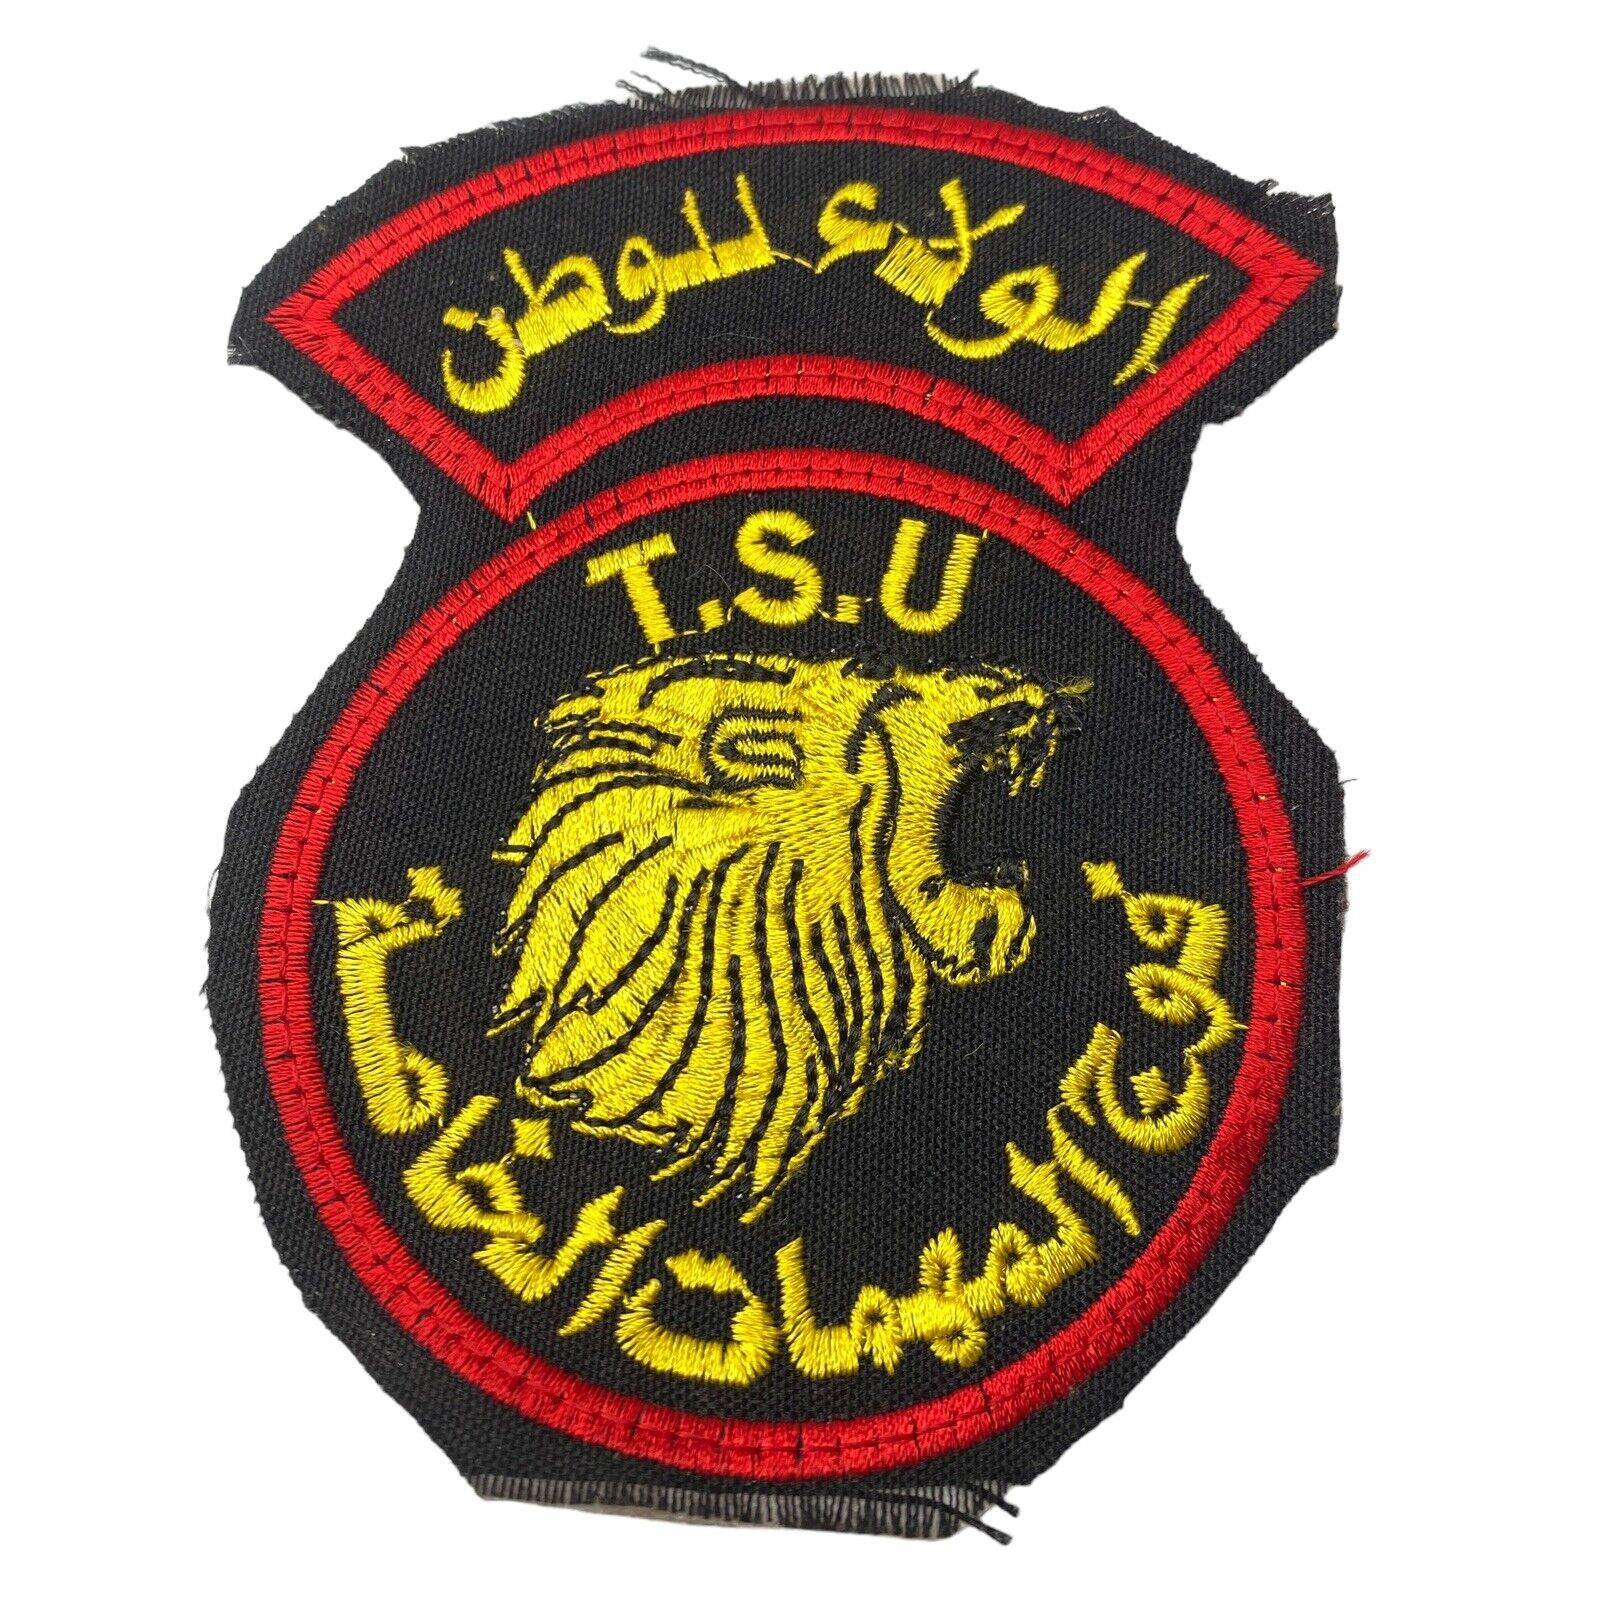 IRAQ-IRAQI SPECIAL FORCES LION PATCH